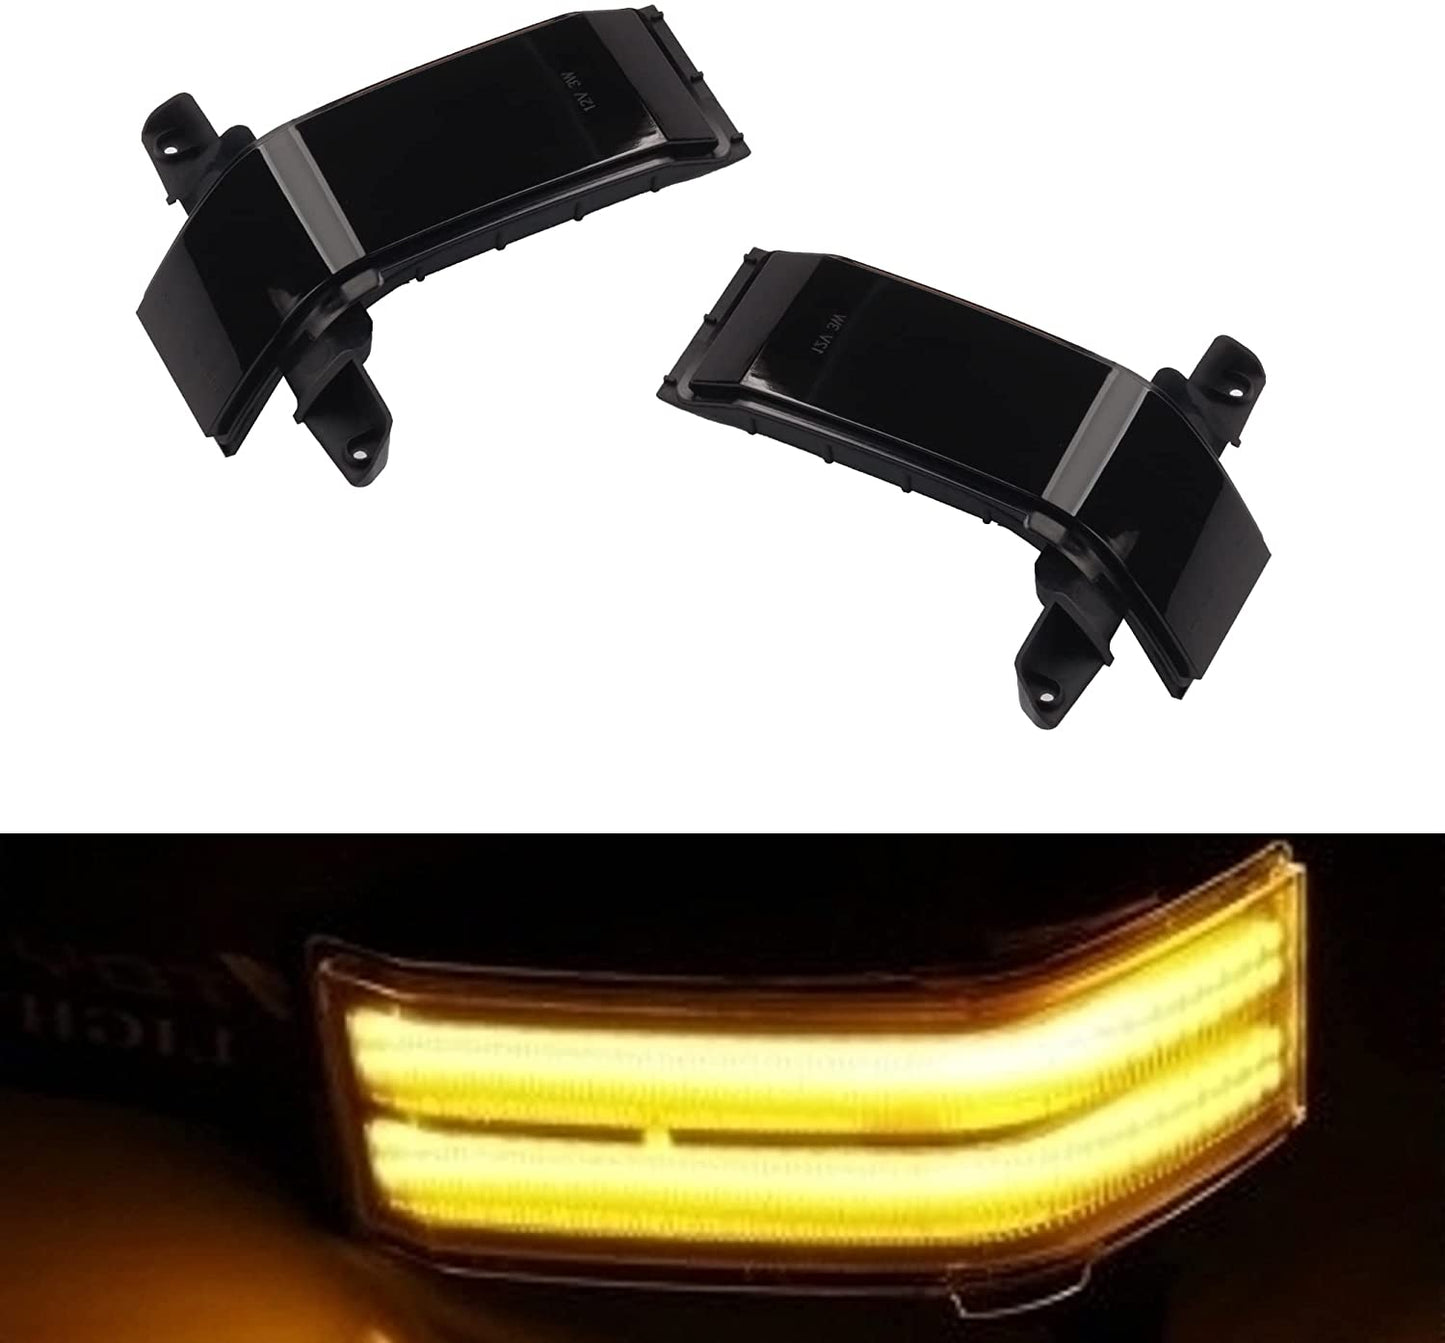 Dasbecan Driver Passenger Side Mirror Marker Turn Signal Light Amber LED Smoked Lens Compatible with Chevrolet Silverado GMC Sierra 1500 2500HD 3500HD OEM# GM23444105 GM23444106 1 Pair Left Right Side